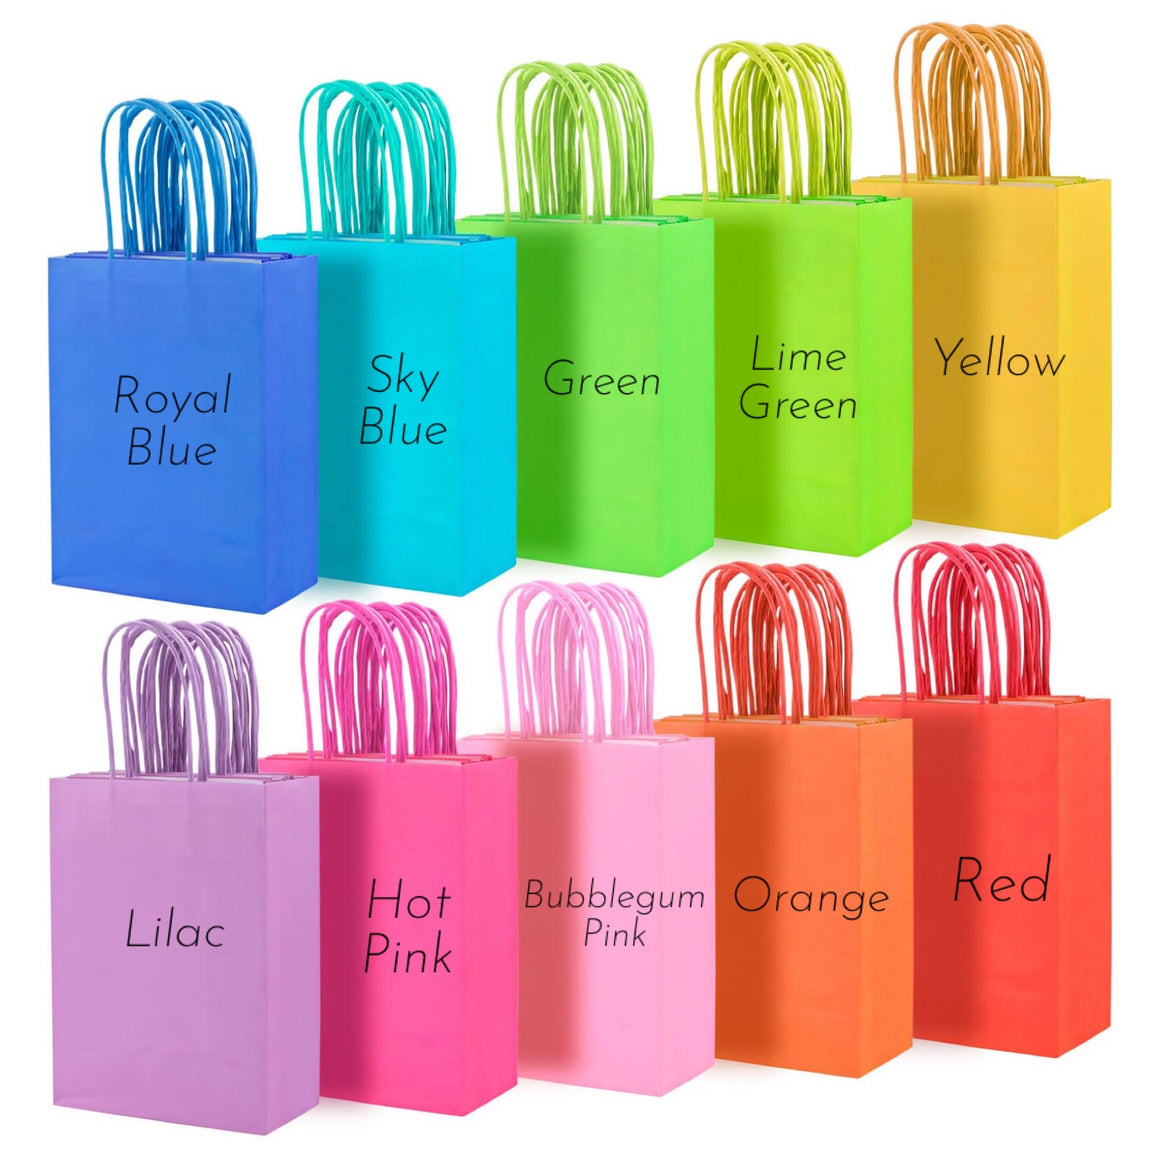 GIFT BAGS - PICK YOUR OWN COLOUR